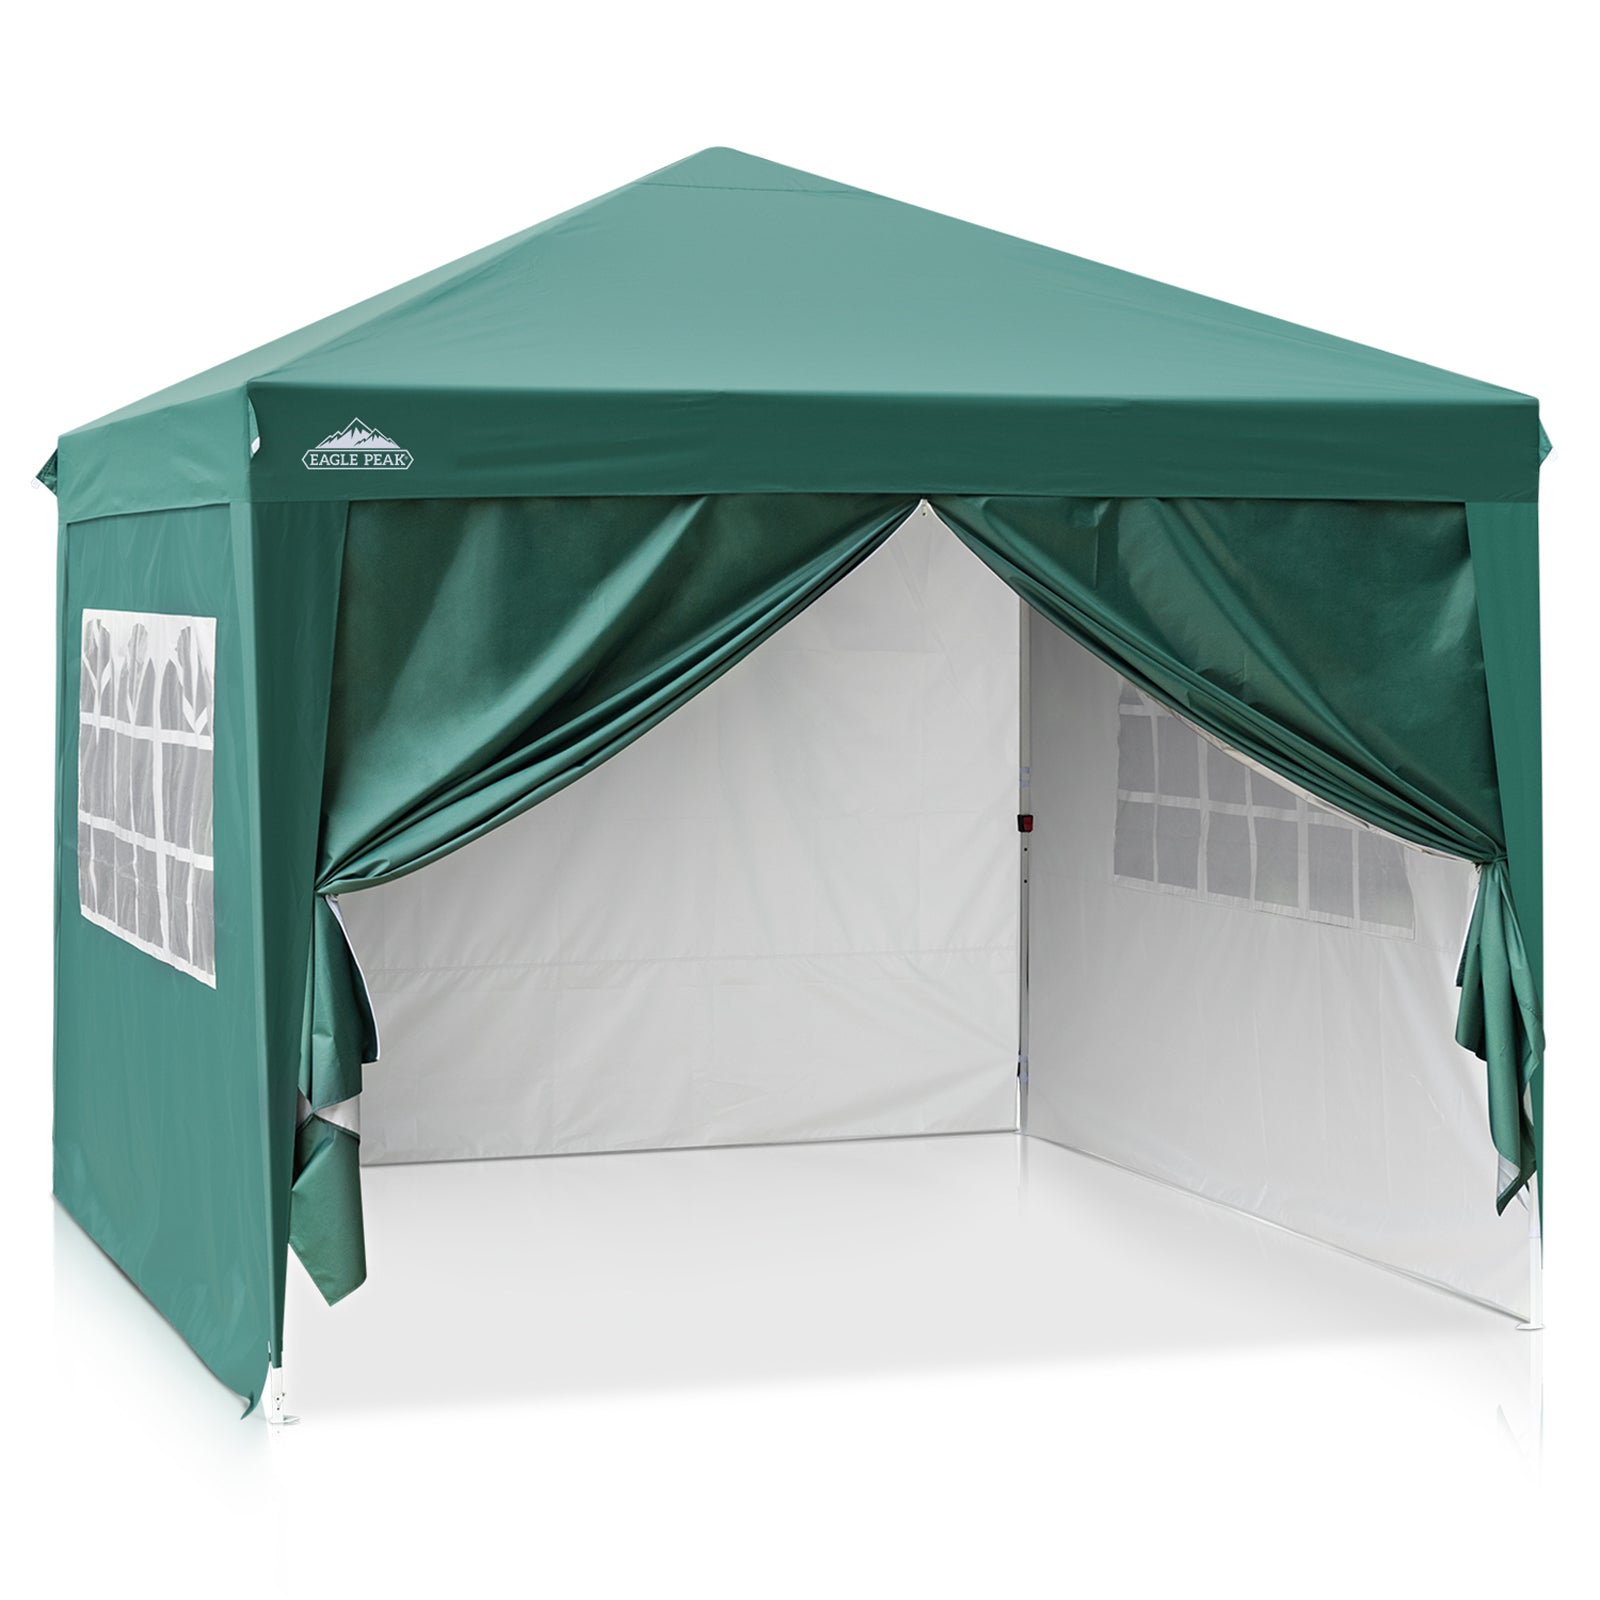 EAGLE PEAK 10x10 Pop Up Canopy Tent with 4 Side Walls, Easy Set up She